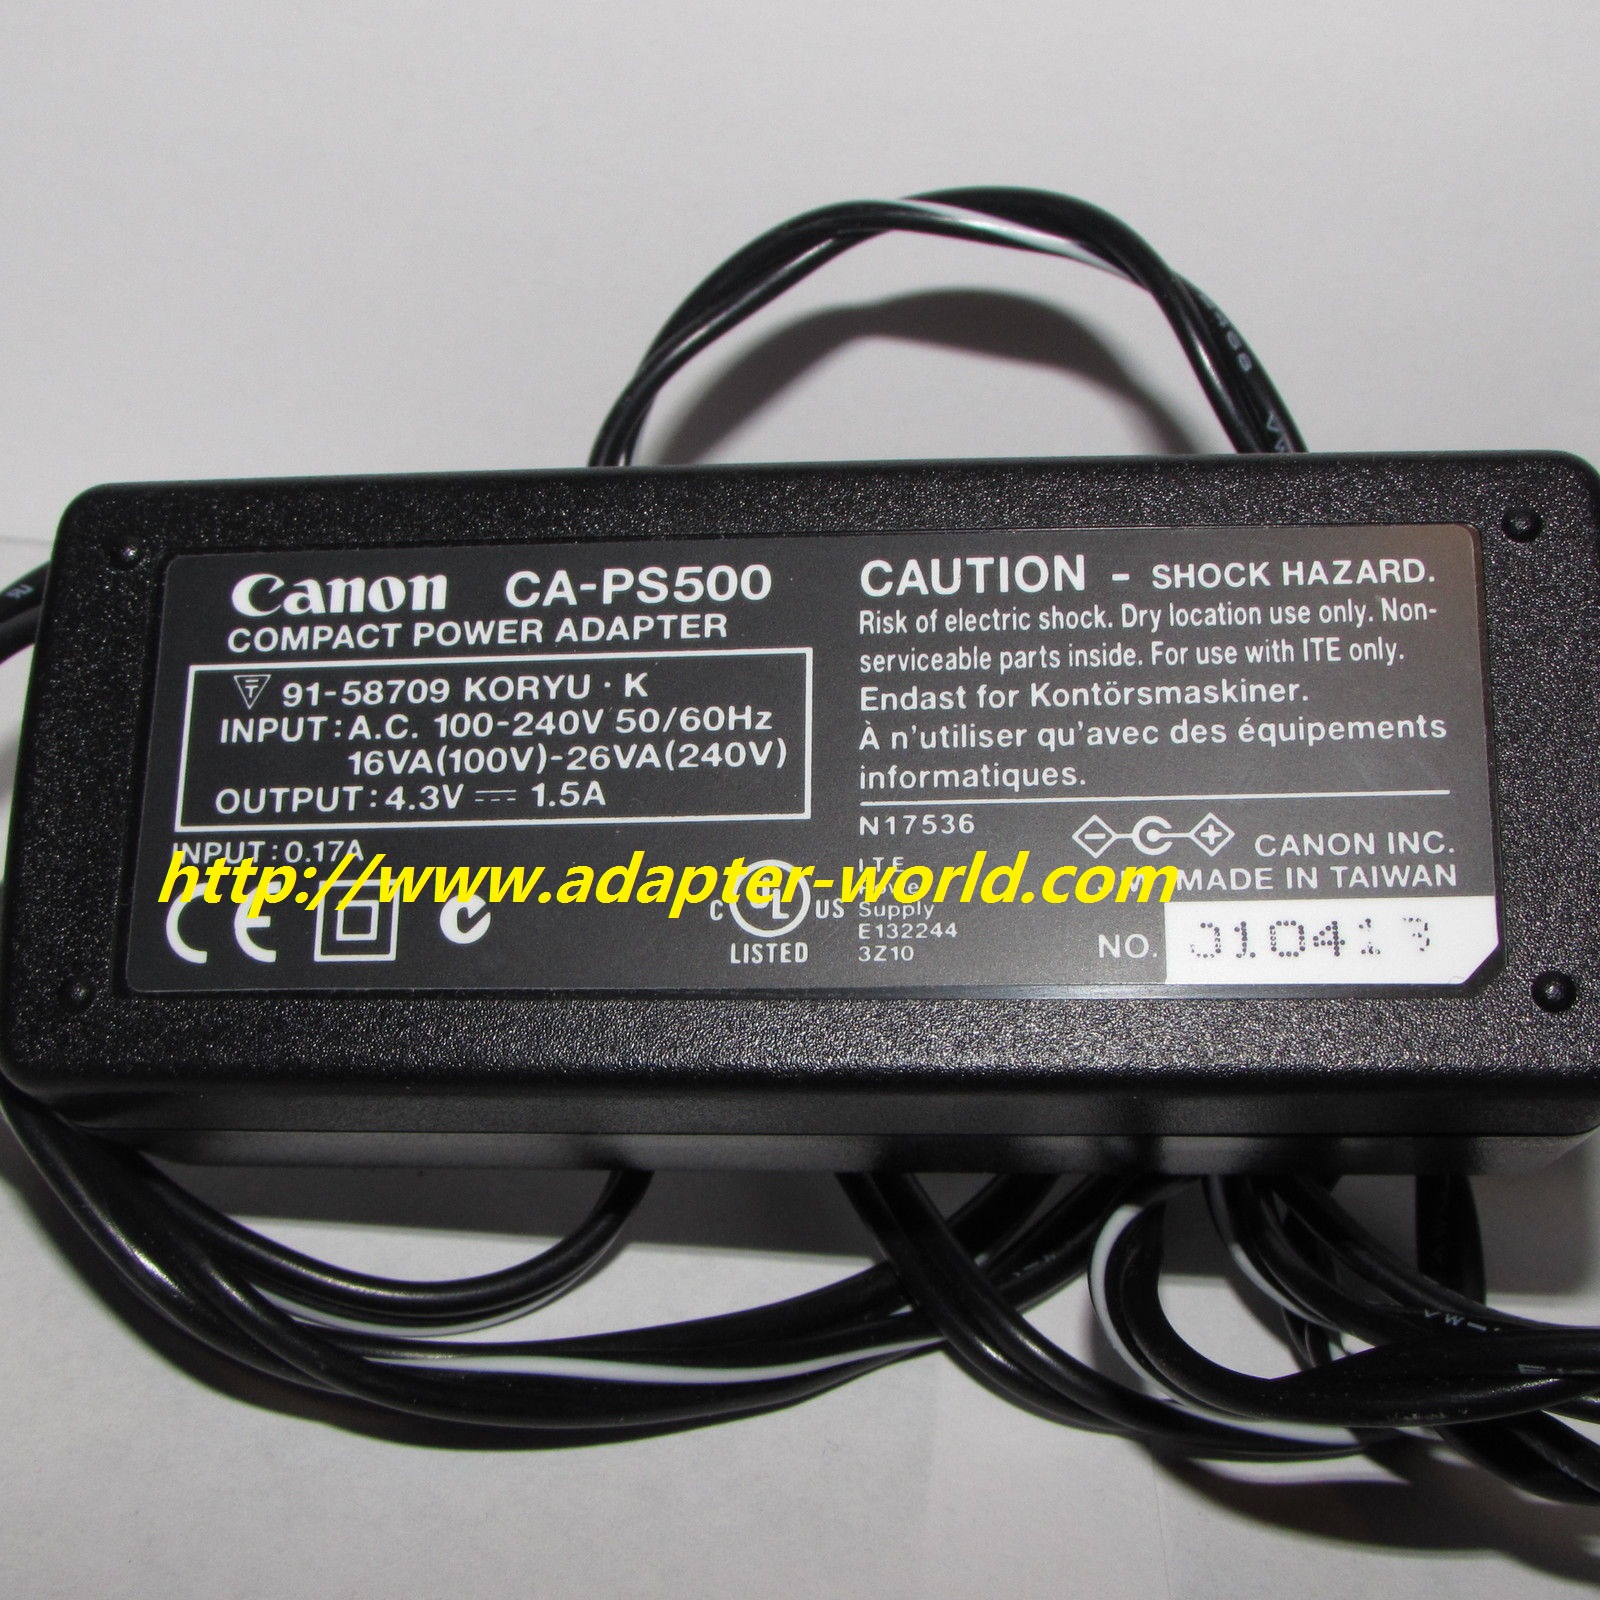 *100% Brand NEW* Canon CA-PS500 4.3V 1.5A A S105048 Compact AC Power Adapter Power Supply Free Shipping!